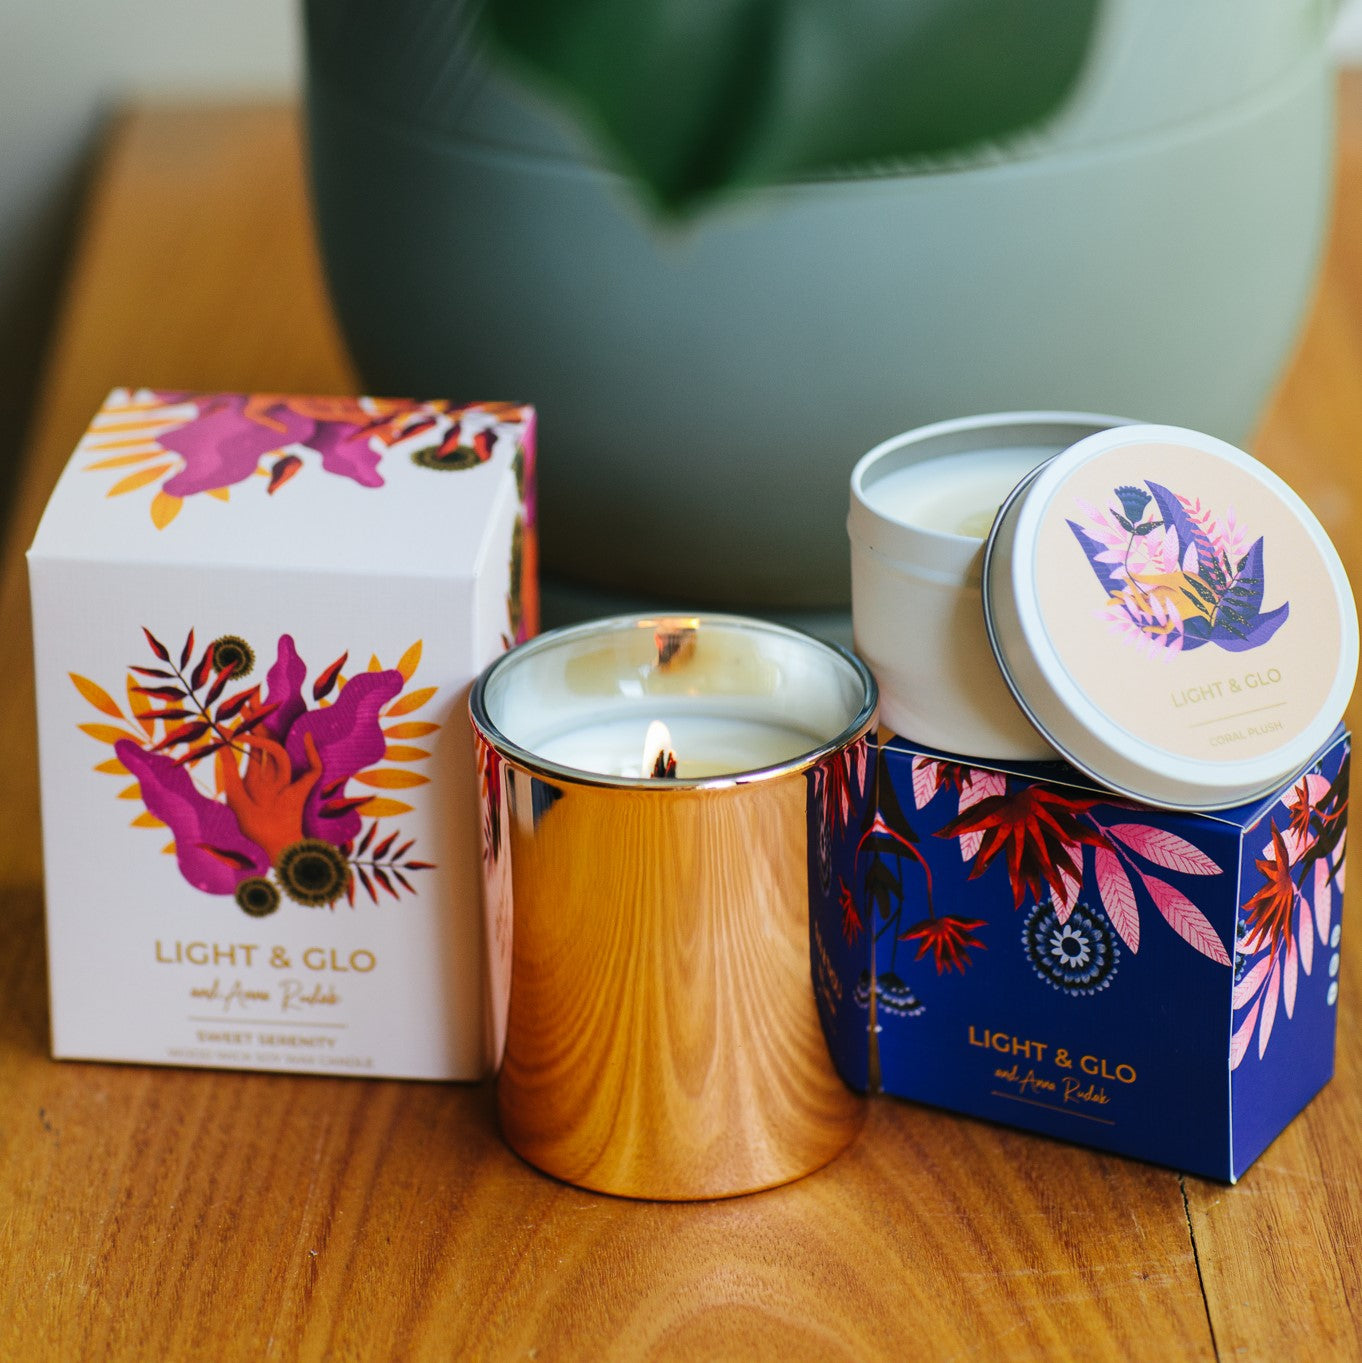 Send Your Love With a Candle this Valentine's